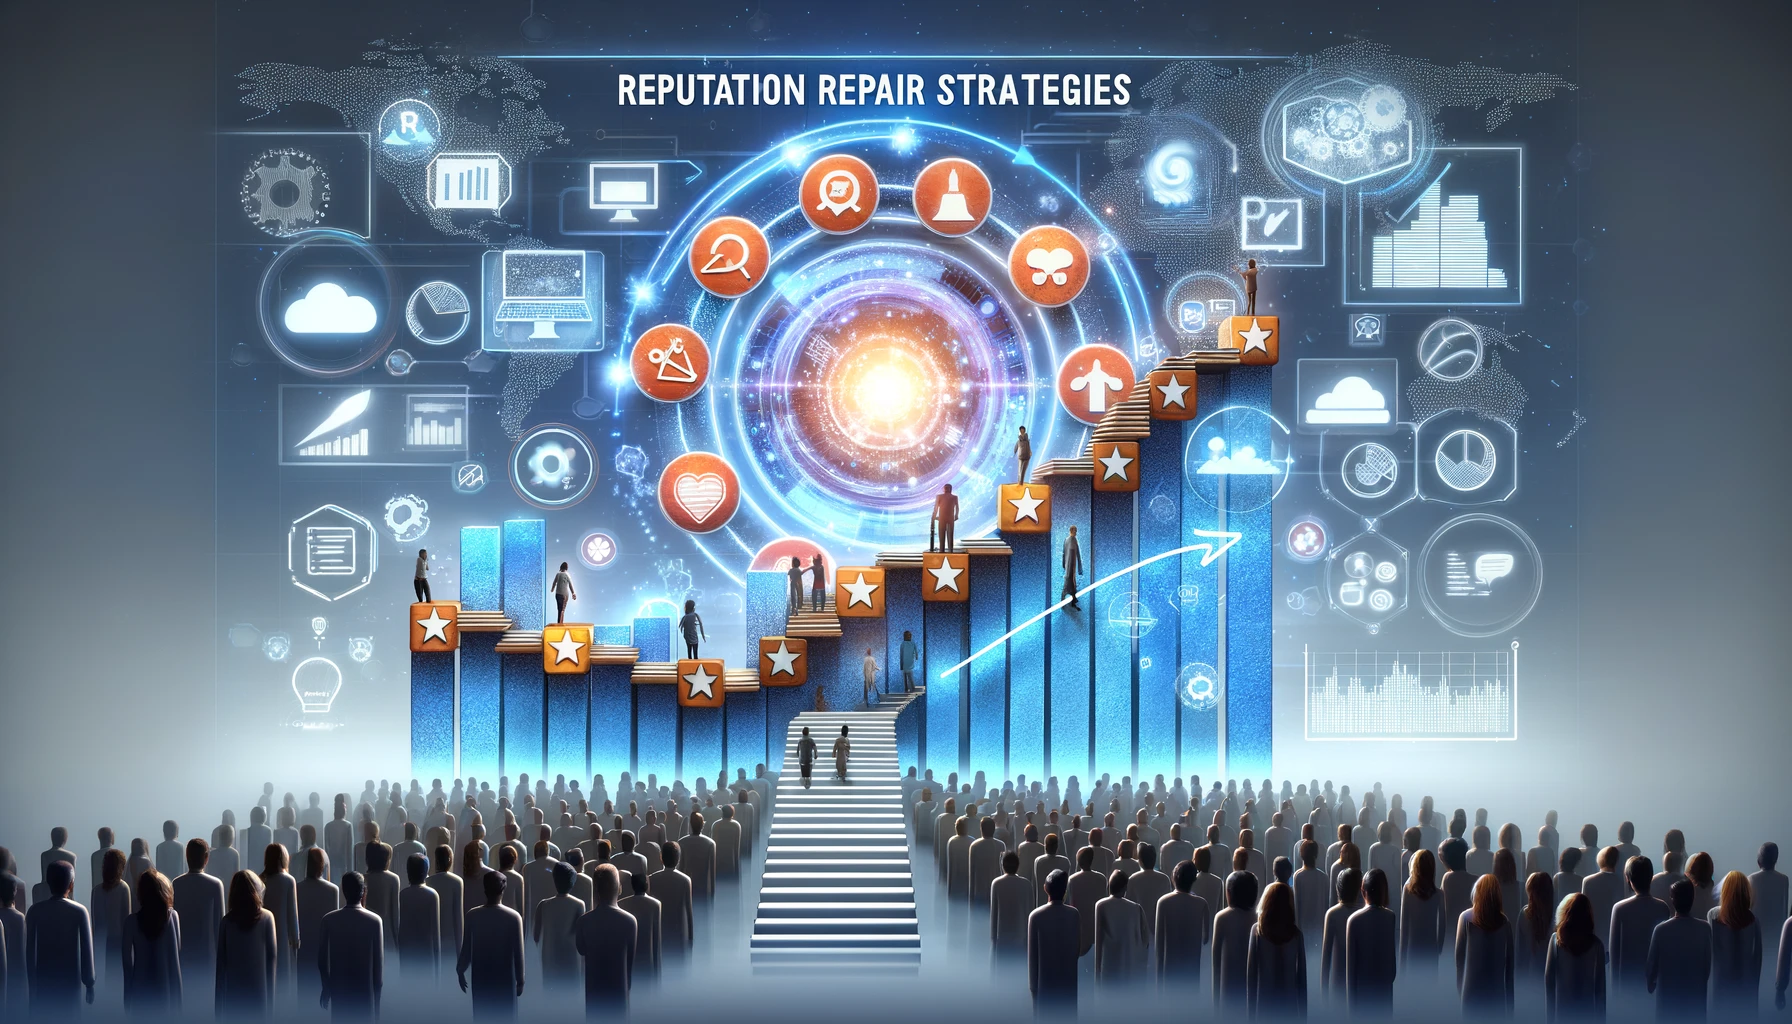 Digital transformation depicted with negative to positive feedback, utilizing social media platforms, content creation, and analytics in a constructive environment for Reputation Repair Strategies.